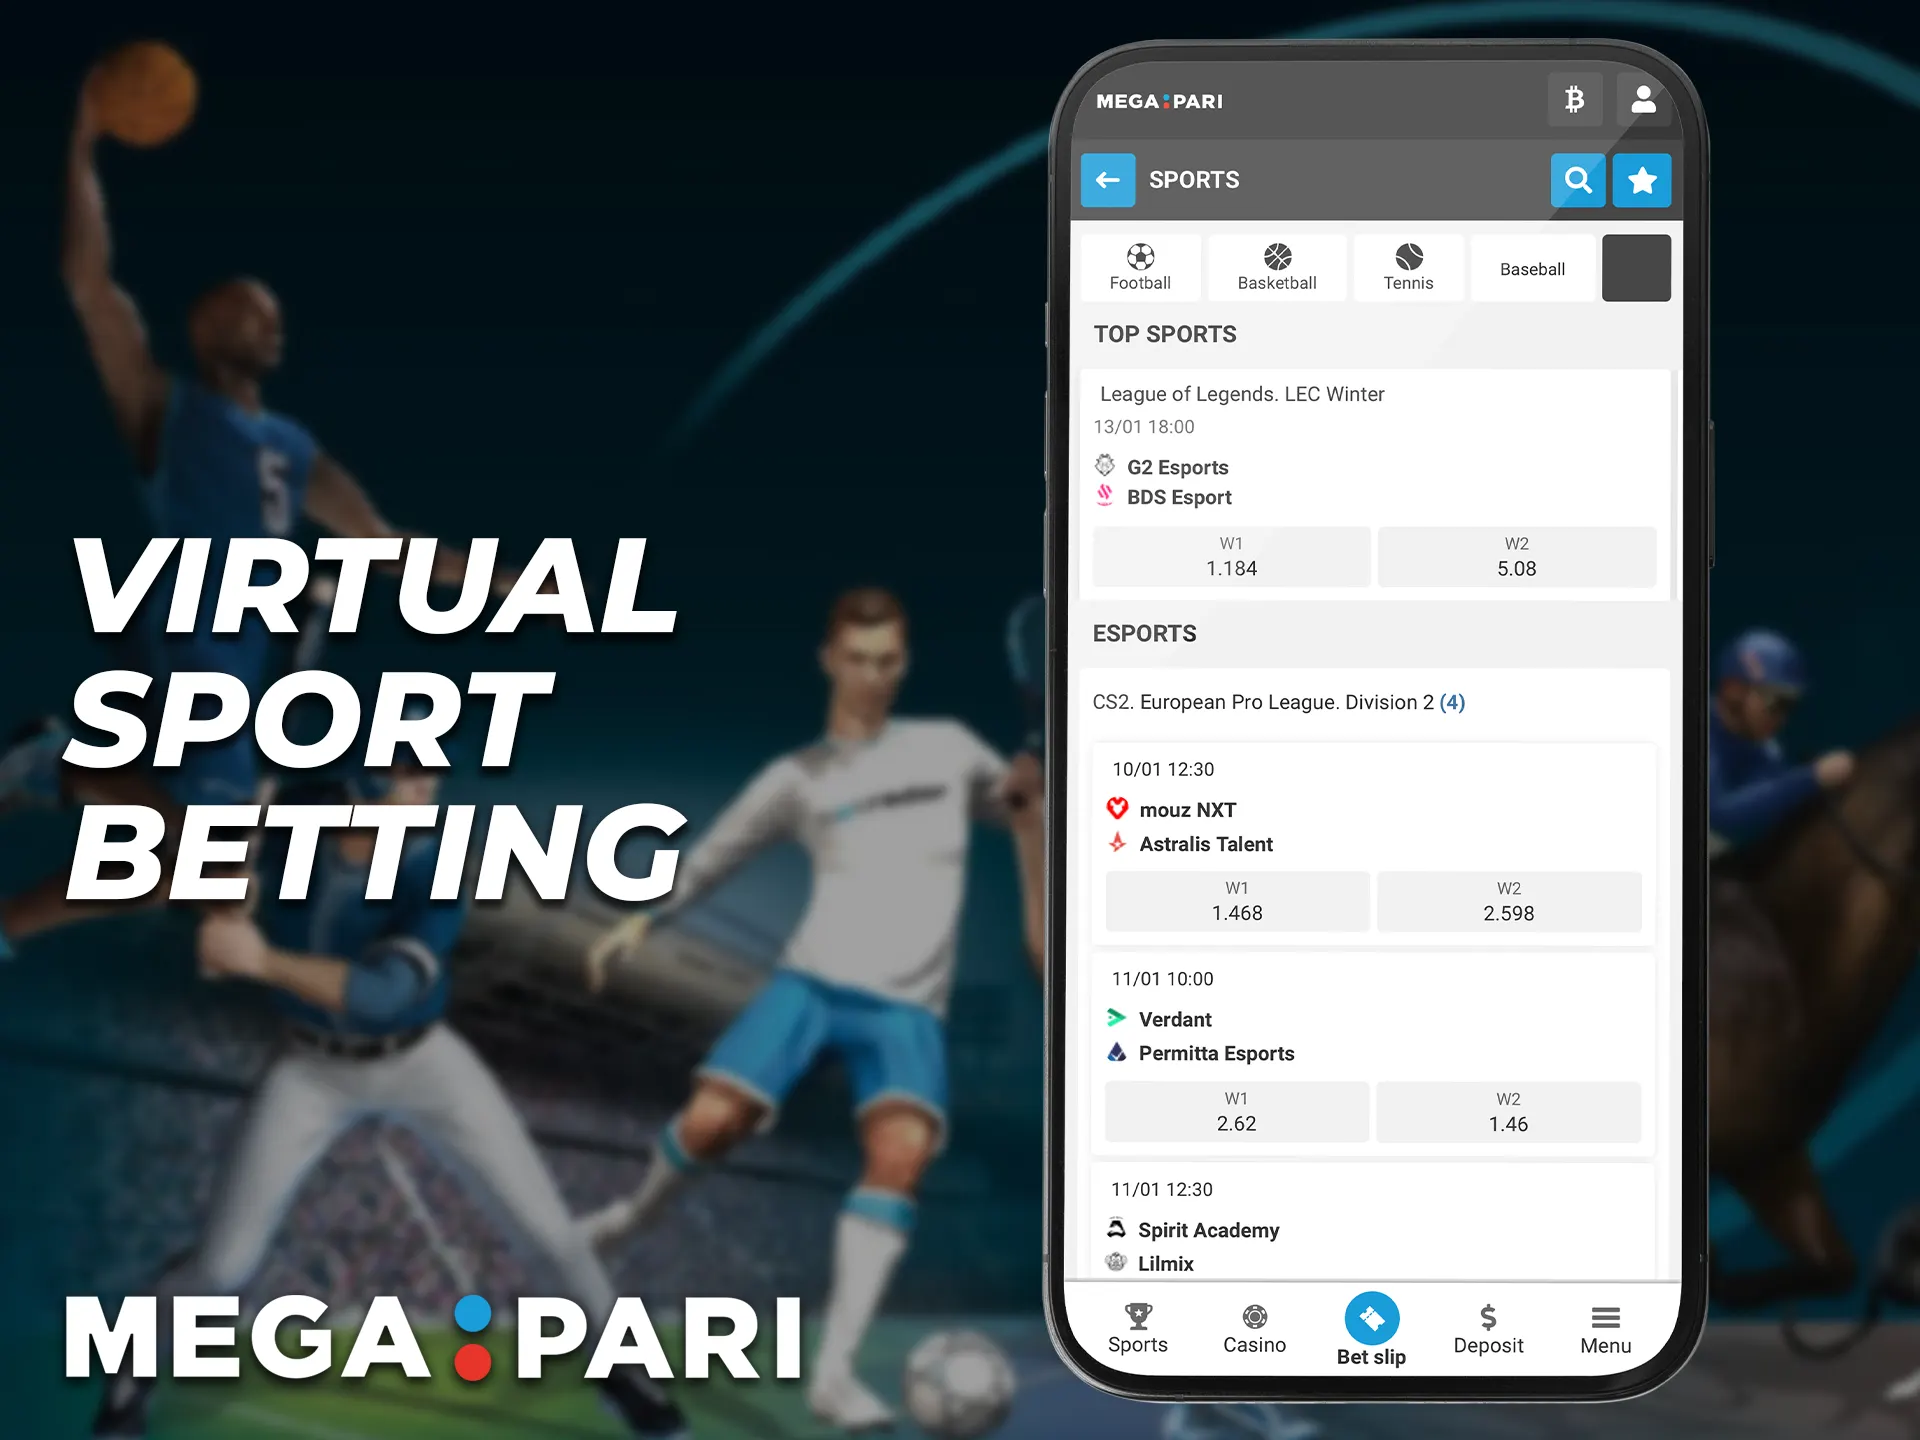 The Megapari app gives its users the opportunity to bet on virtual sports.